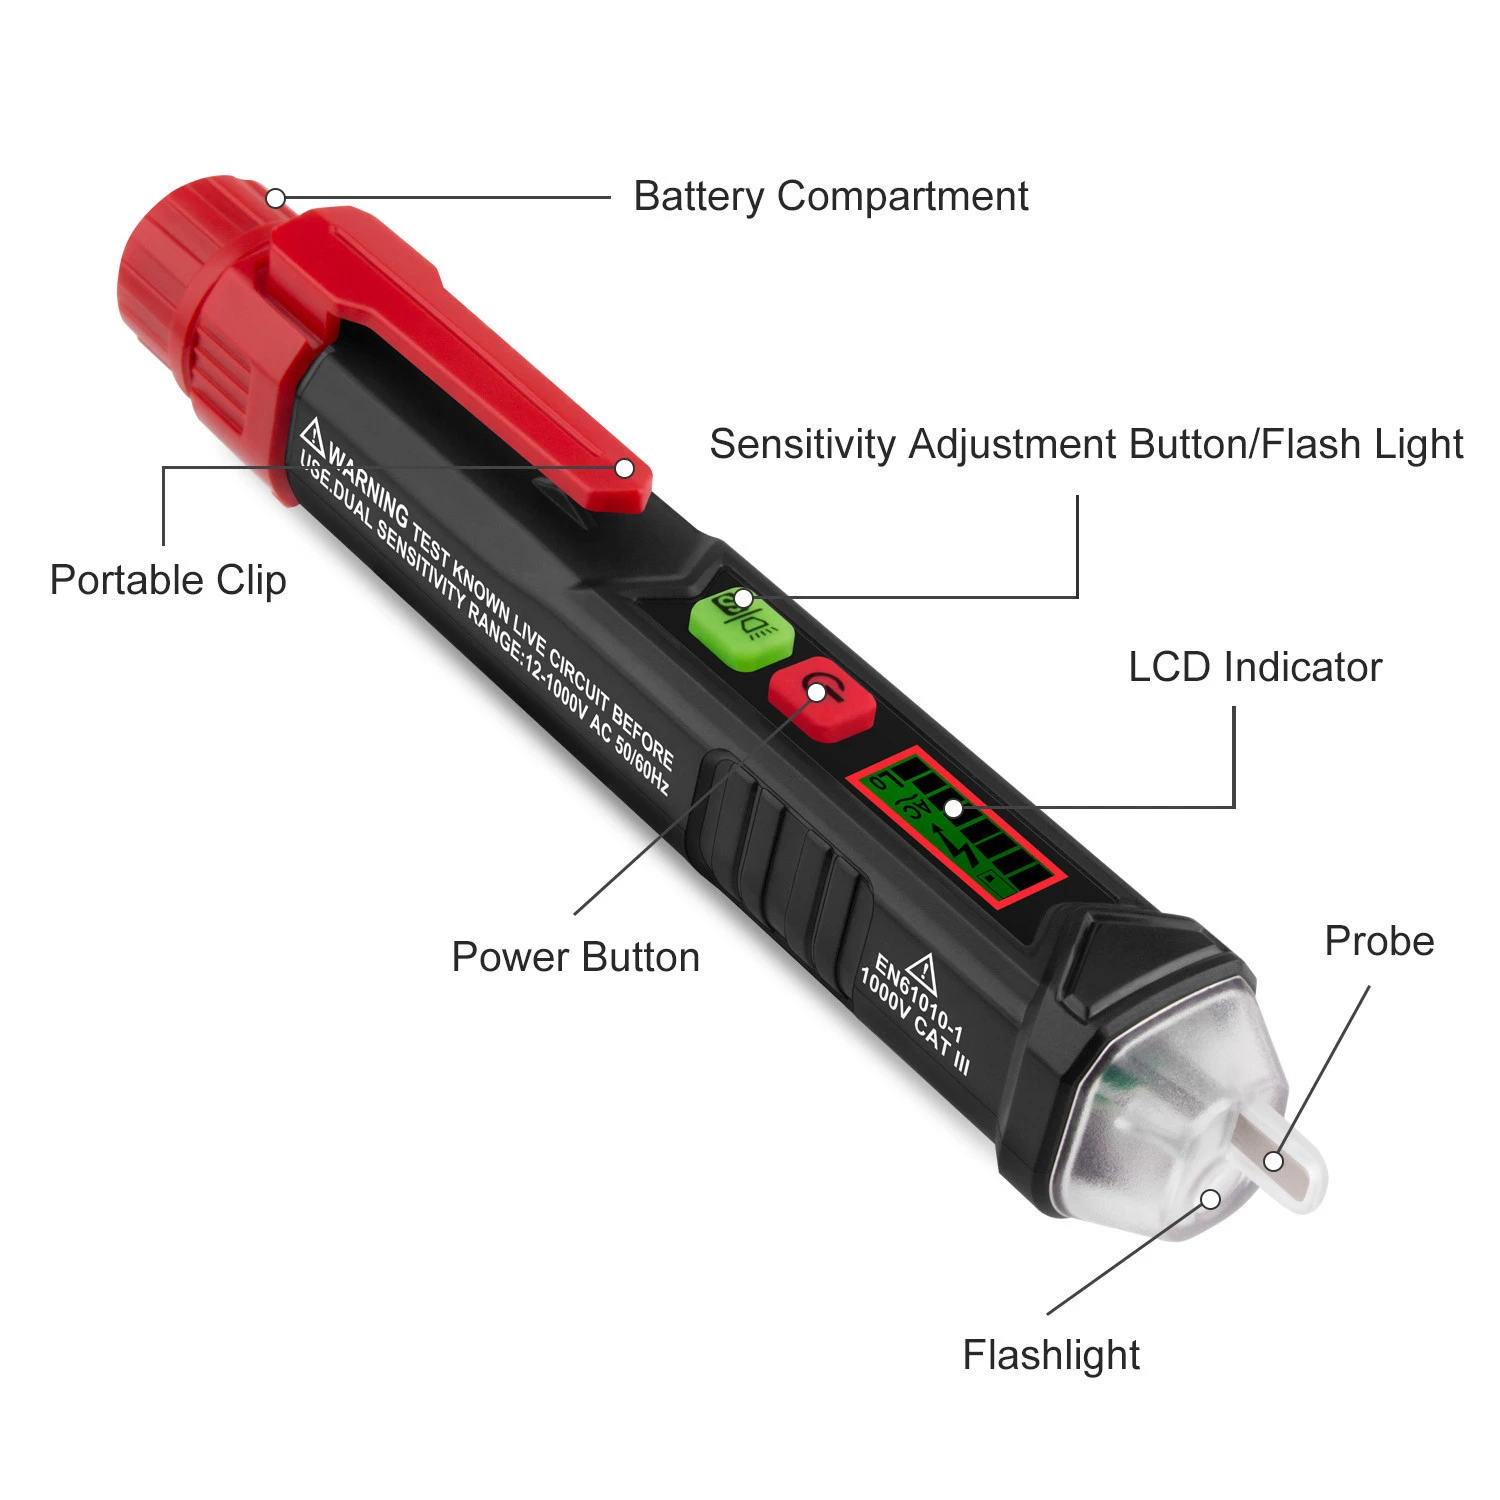 double range voltage tester non contact electric tester of Red and green double color backlight display